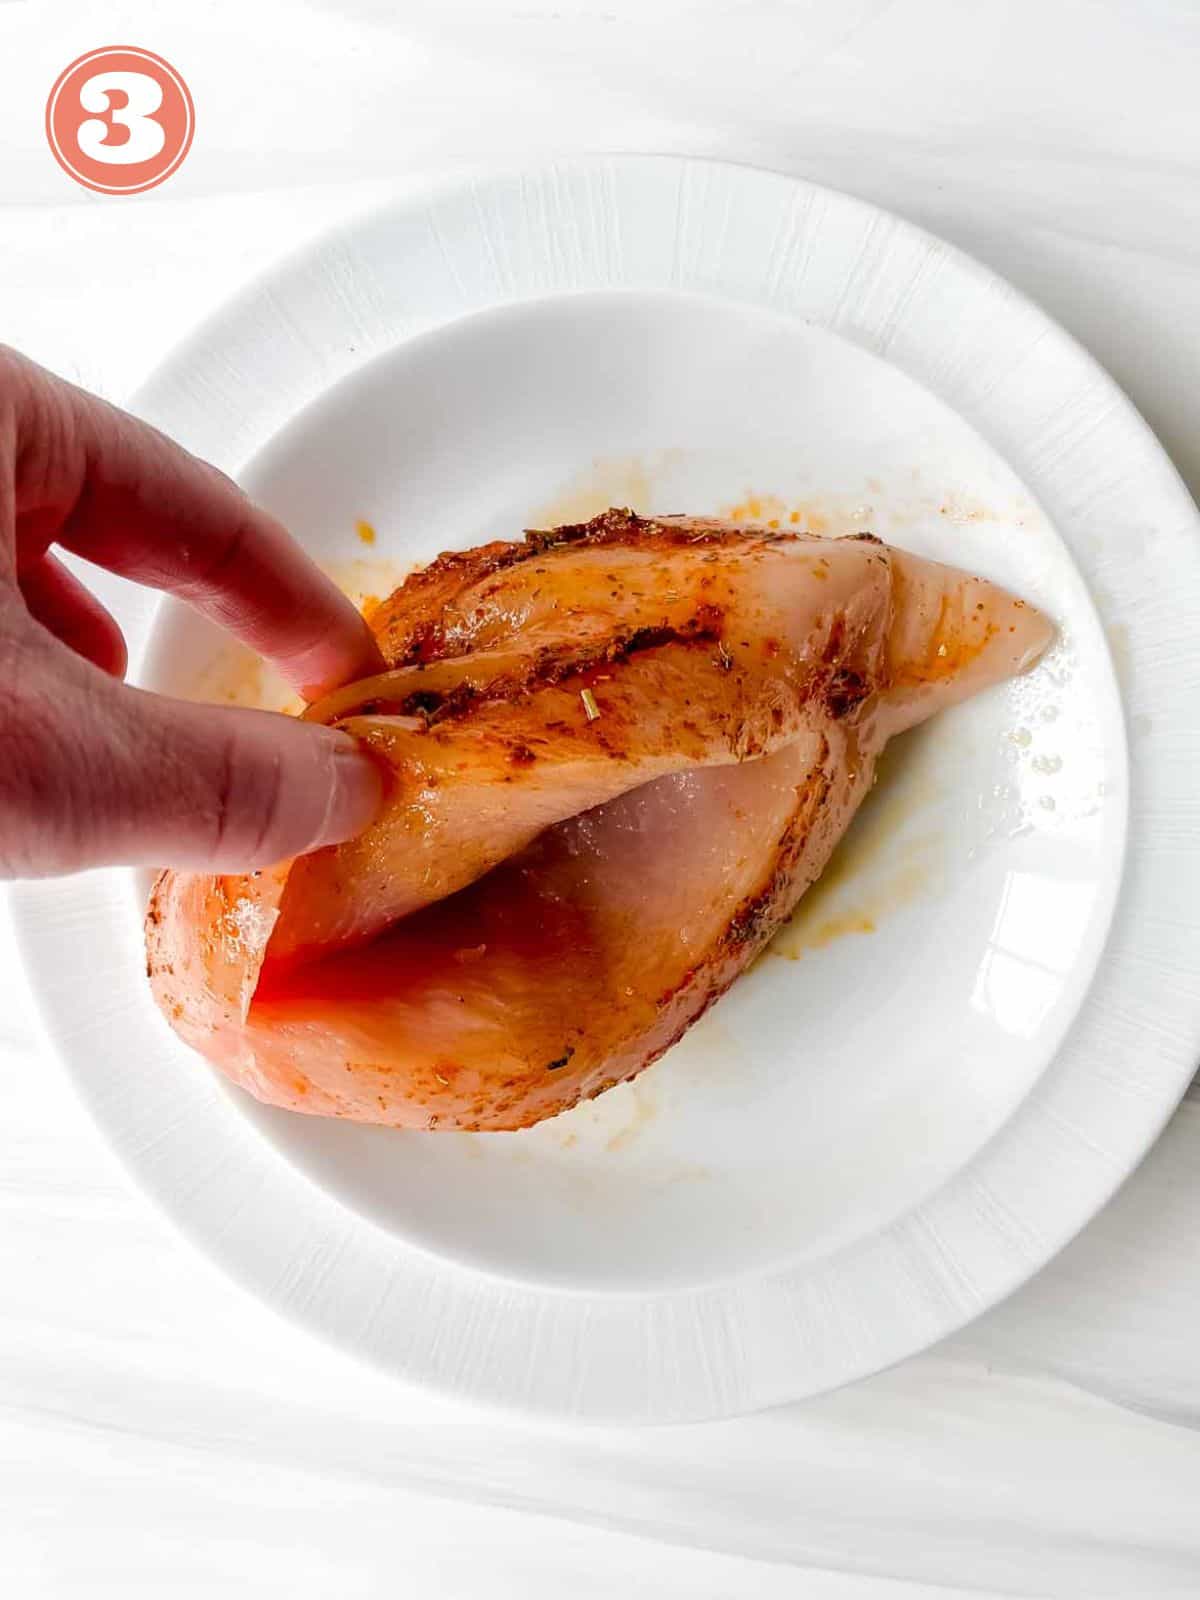 chicken breasts with a pocket sliced into it on a white plate labelled number three.